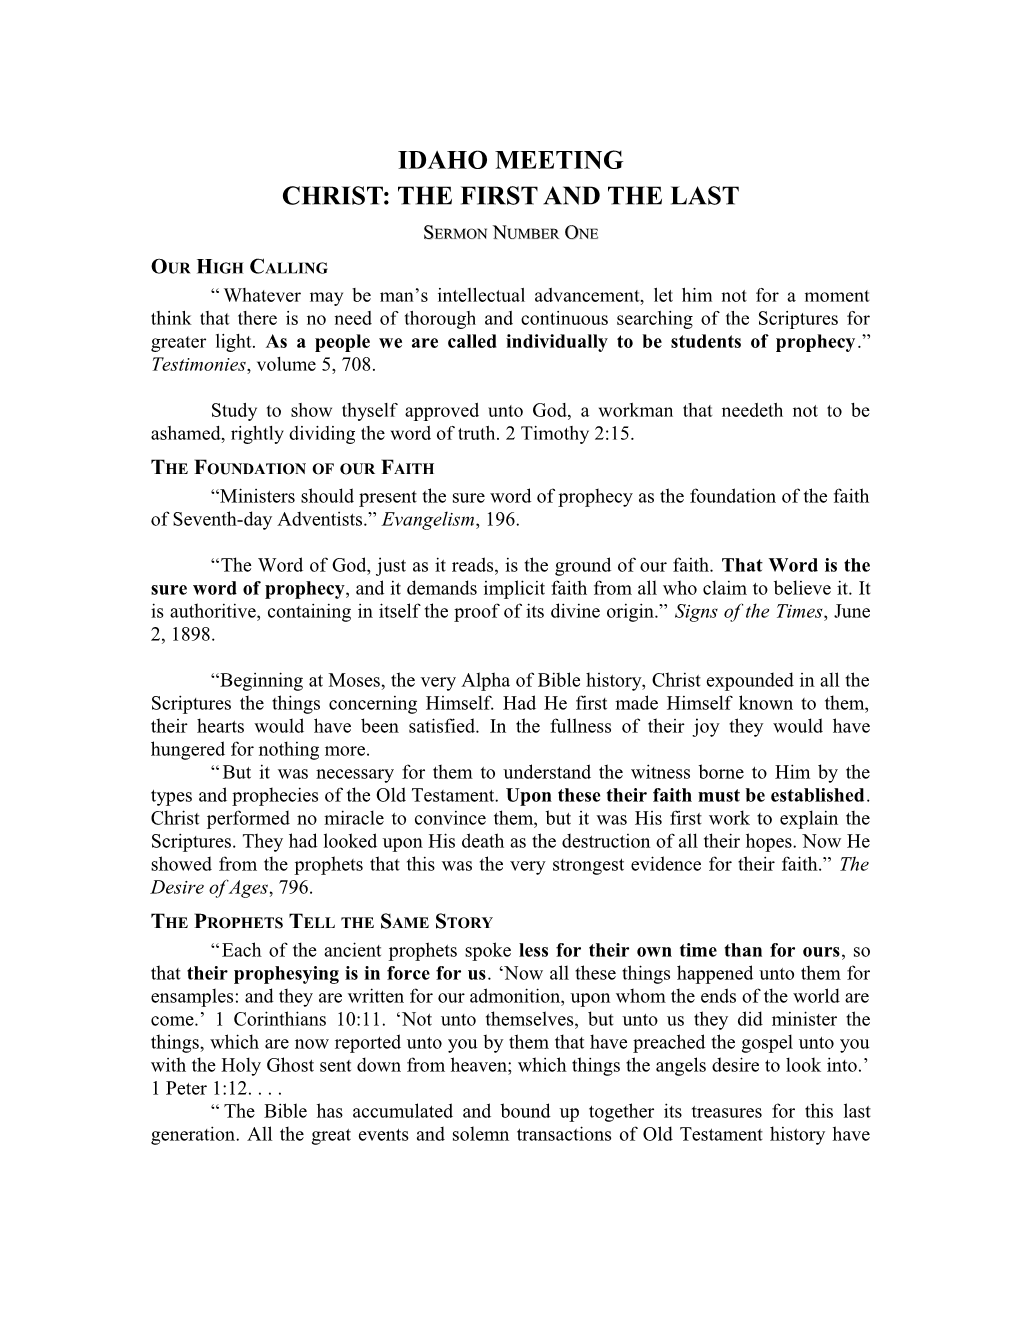 Christ: the First and the Last